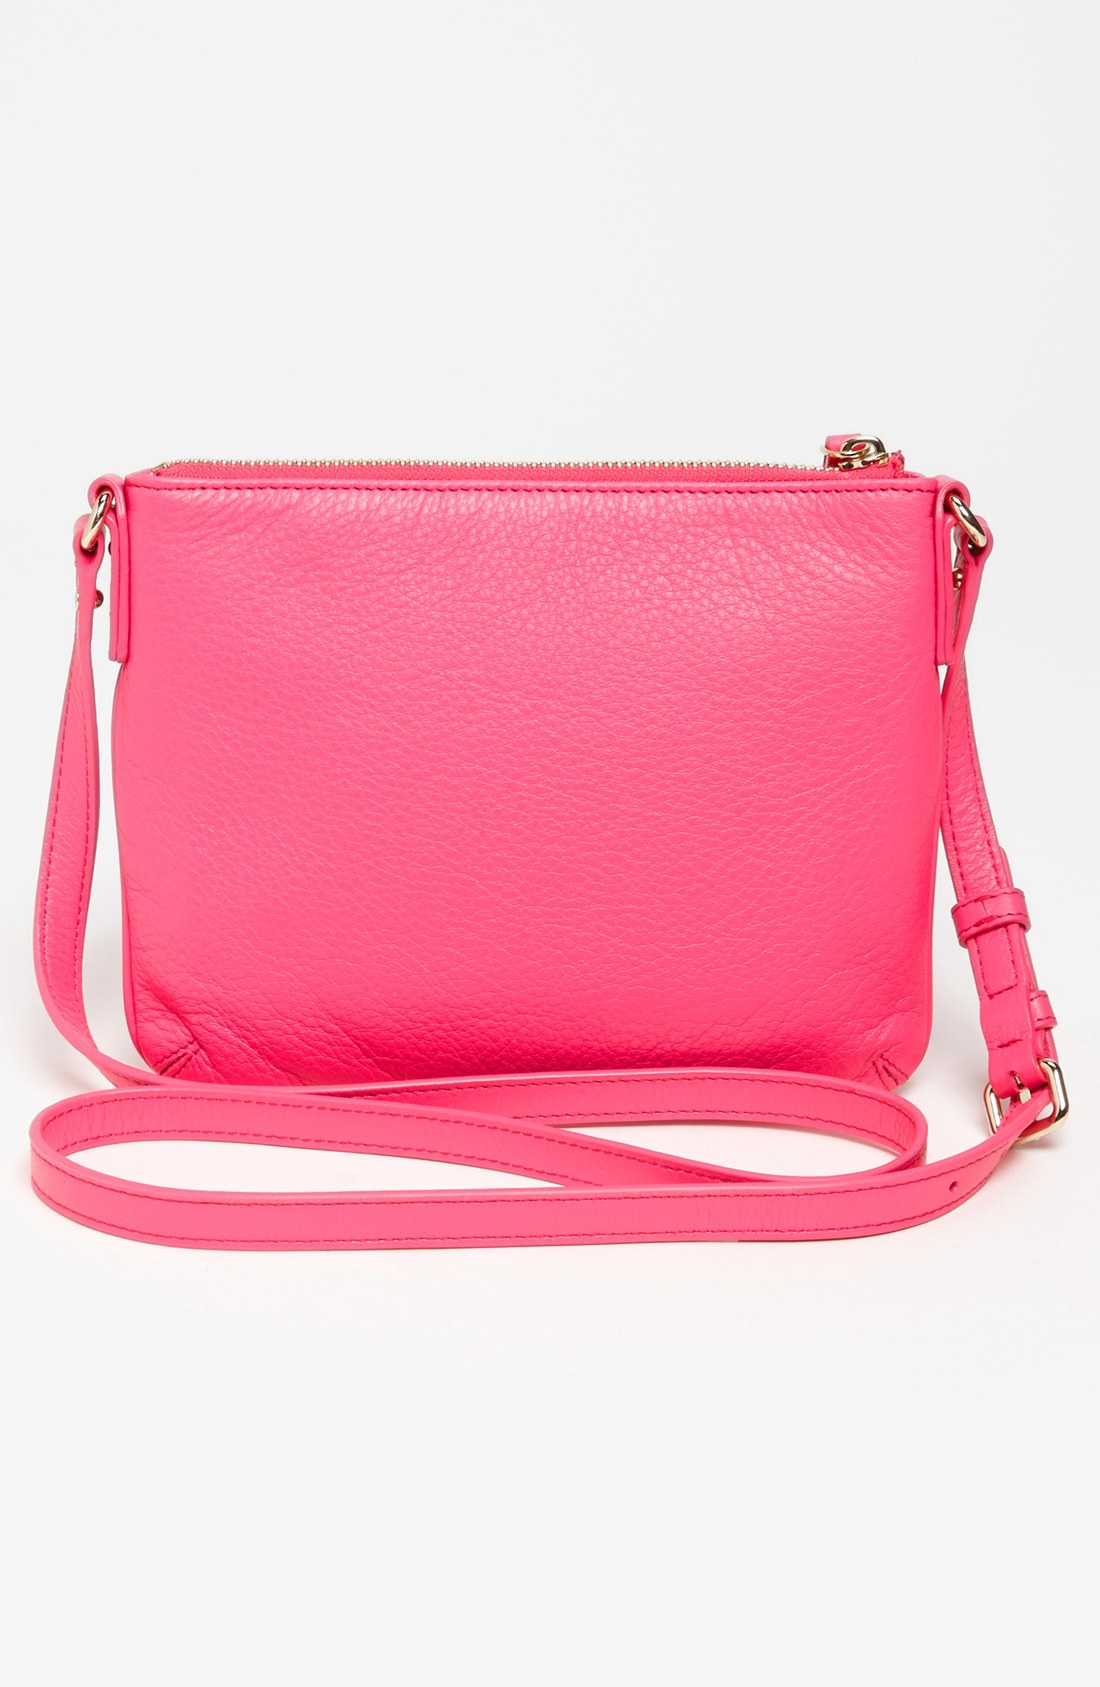 Kate Spade Cobble Hill Tenley Crossbody Bag Small in Pink (Love Pink) | Lyst